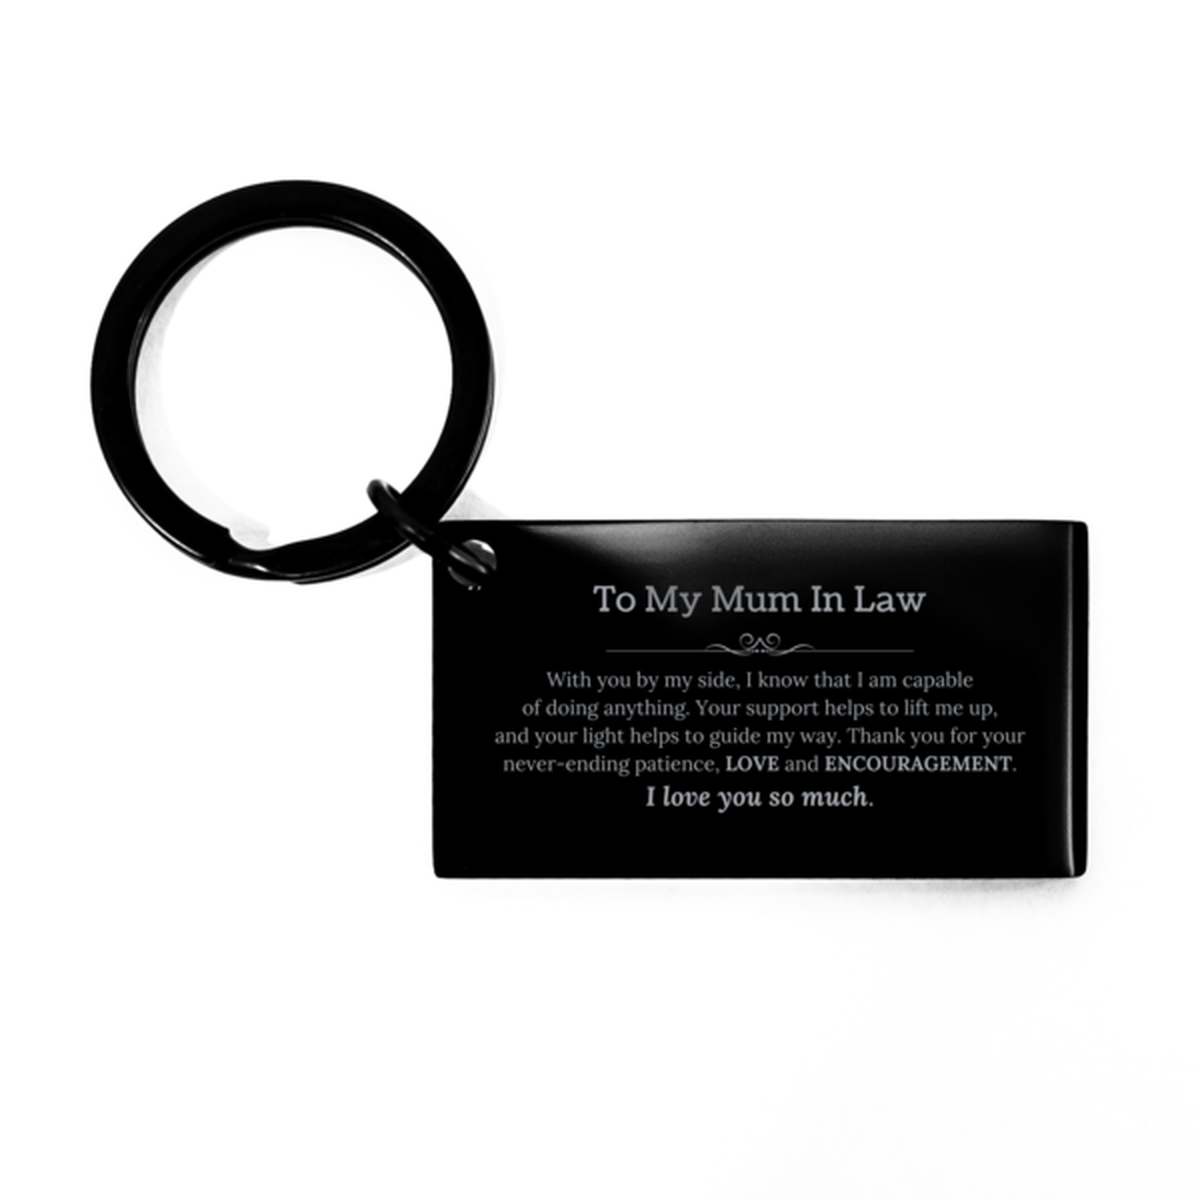 Appreciation Mum In Law  Keychain Gifts, To My Mum In Law  Birthday Christmas Wedding Keepsake Gifts for Mum In Law  With you by my side, I know that I am capable of doing anything. I love you so much